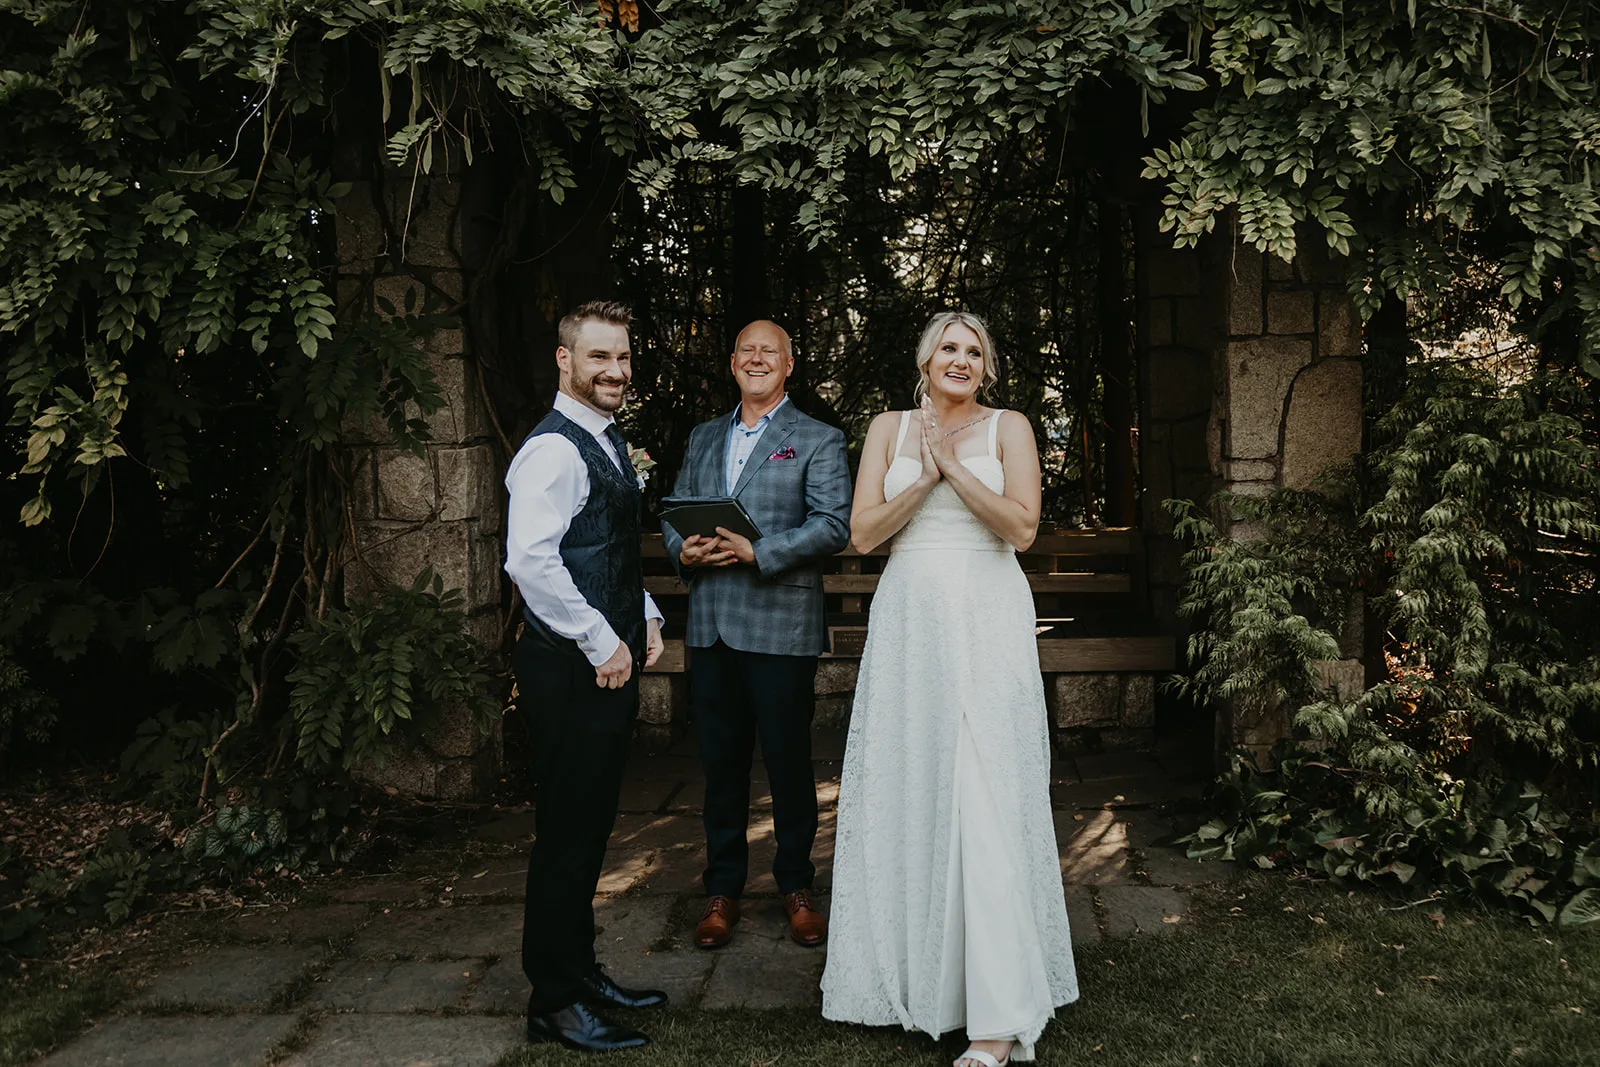 Justine & Matt with Officiant Lonnie, Erica Miller Photography